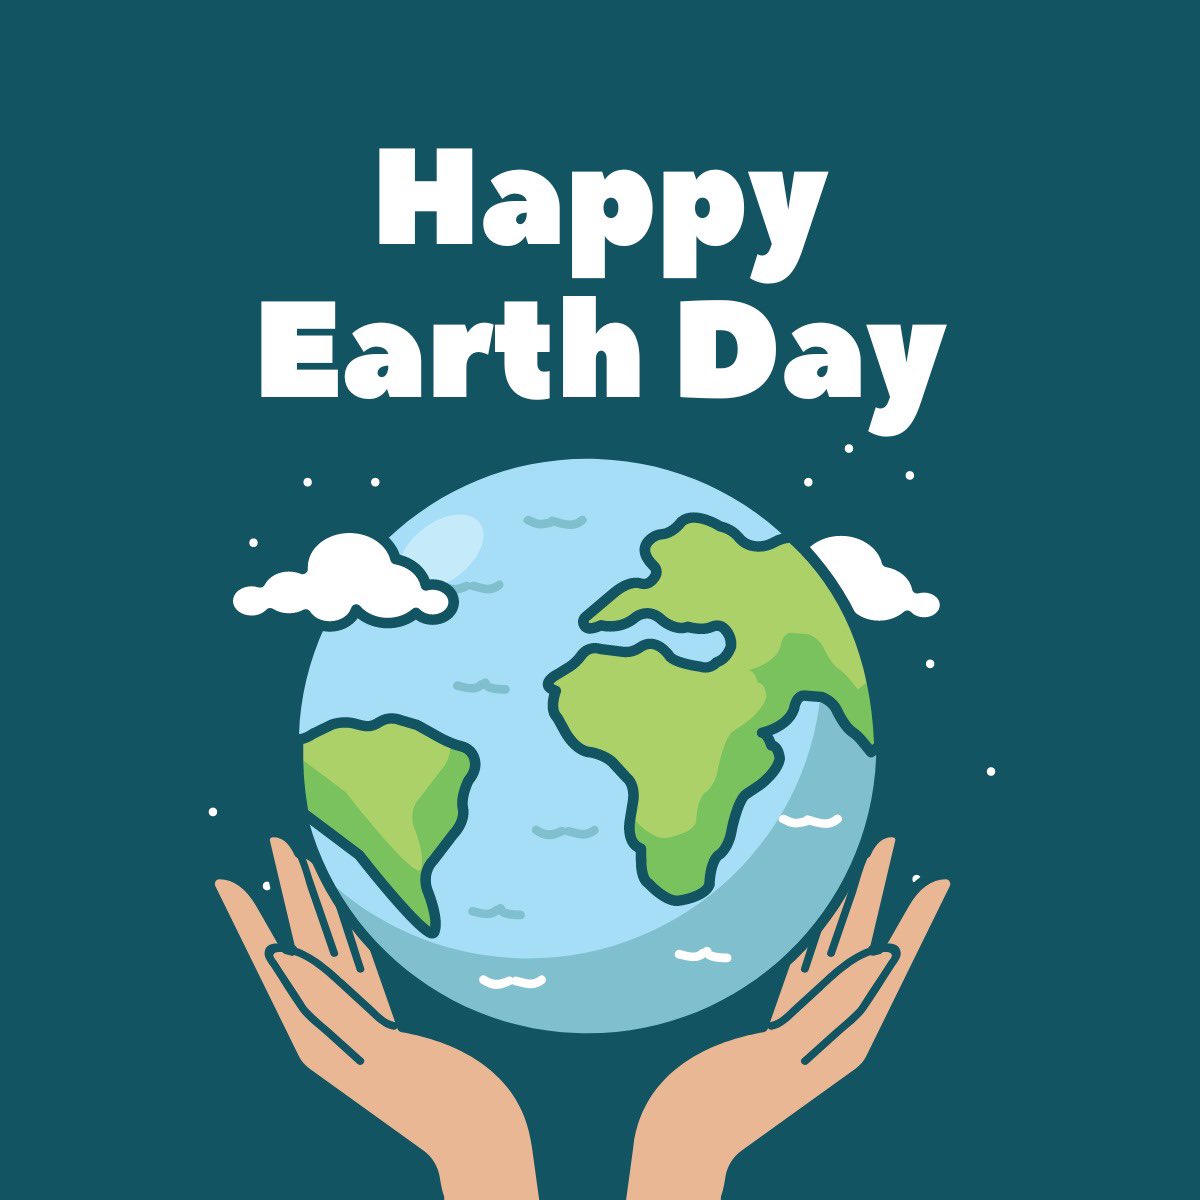 As we celebrate #EarthDay, let's emphasize the private sector's vital role in sustainable development. By investing in renewable energy, green technologies, and eco-friendly practices, businesses can drive positive change for the economy and the environment. Let's harness the